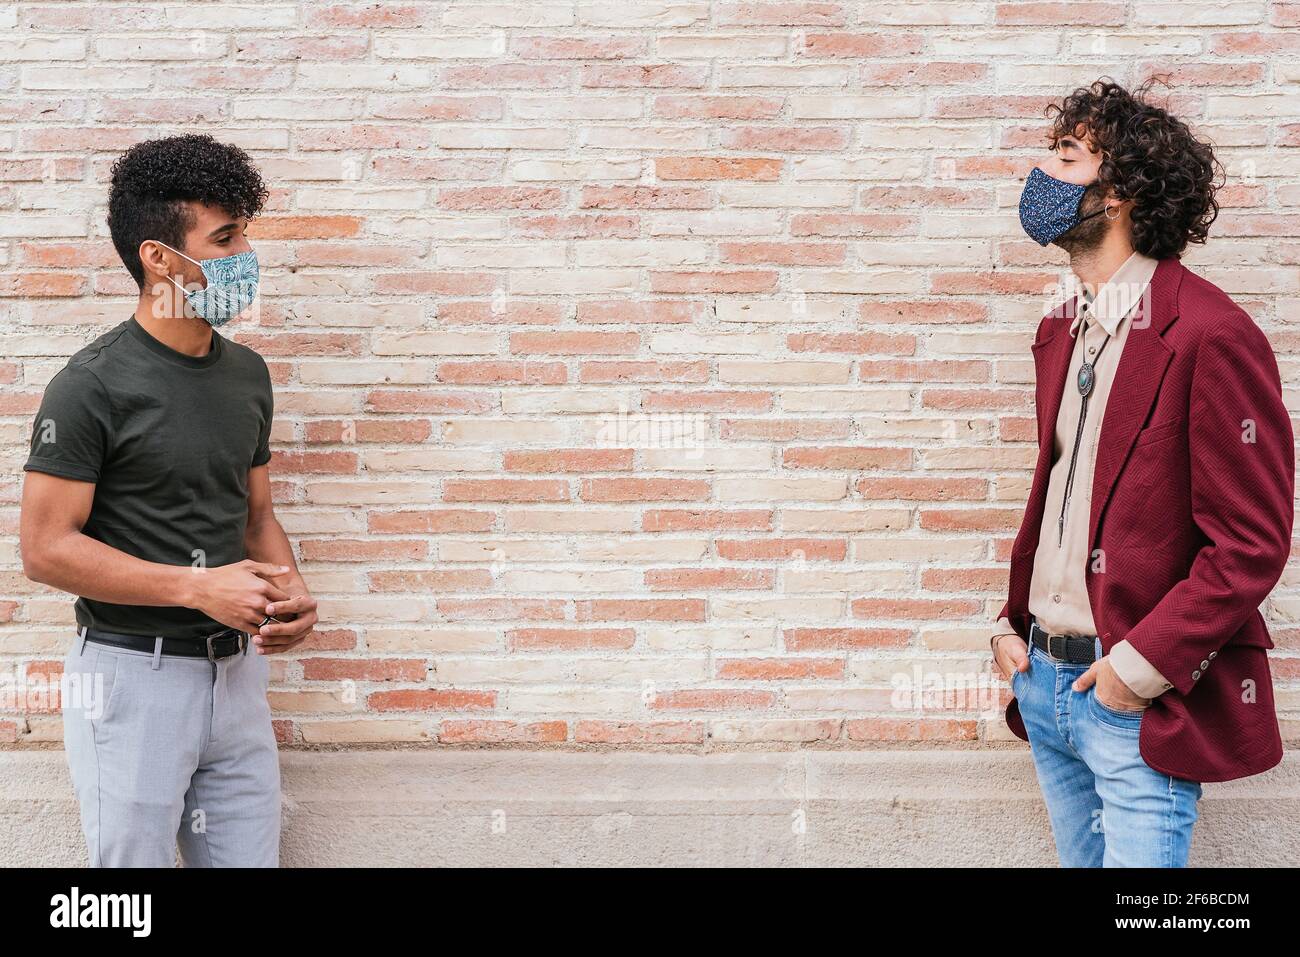 latin and caucasian man standing near a brick wall and keeping security distance. They wear casual clothing and protective face masks. Stock Photo